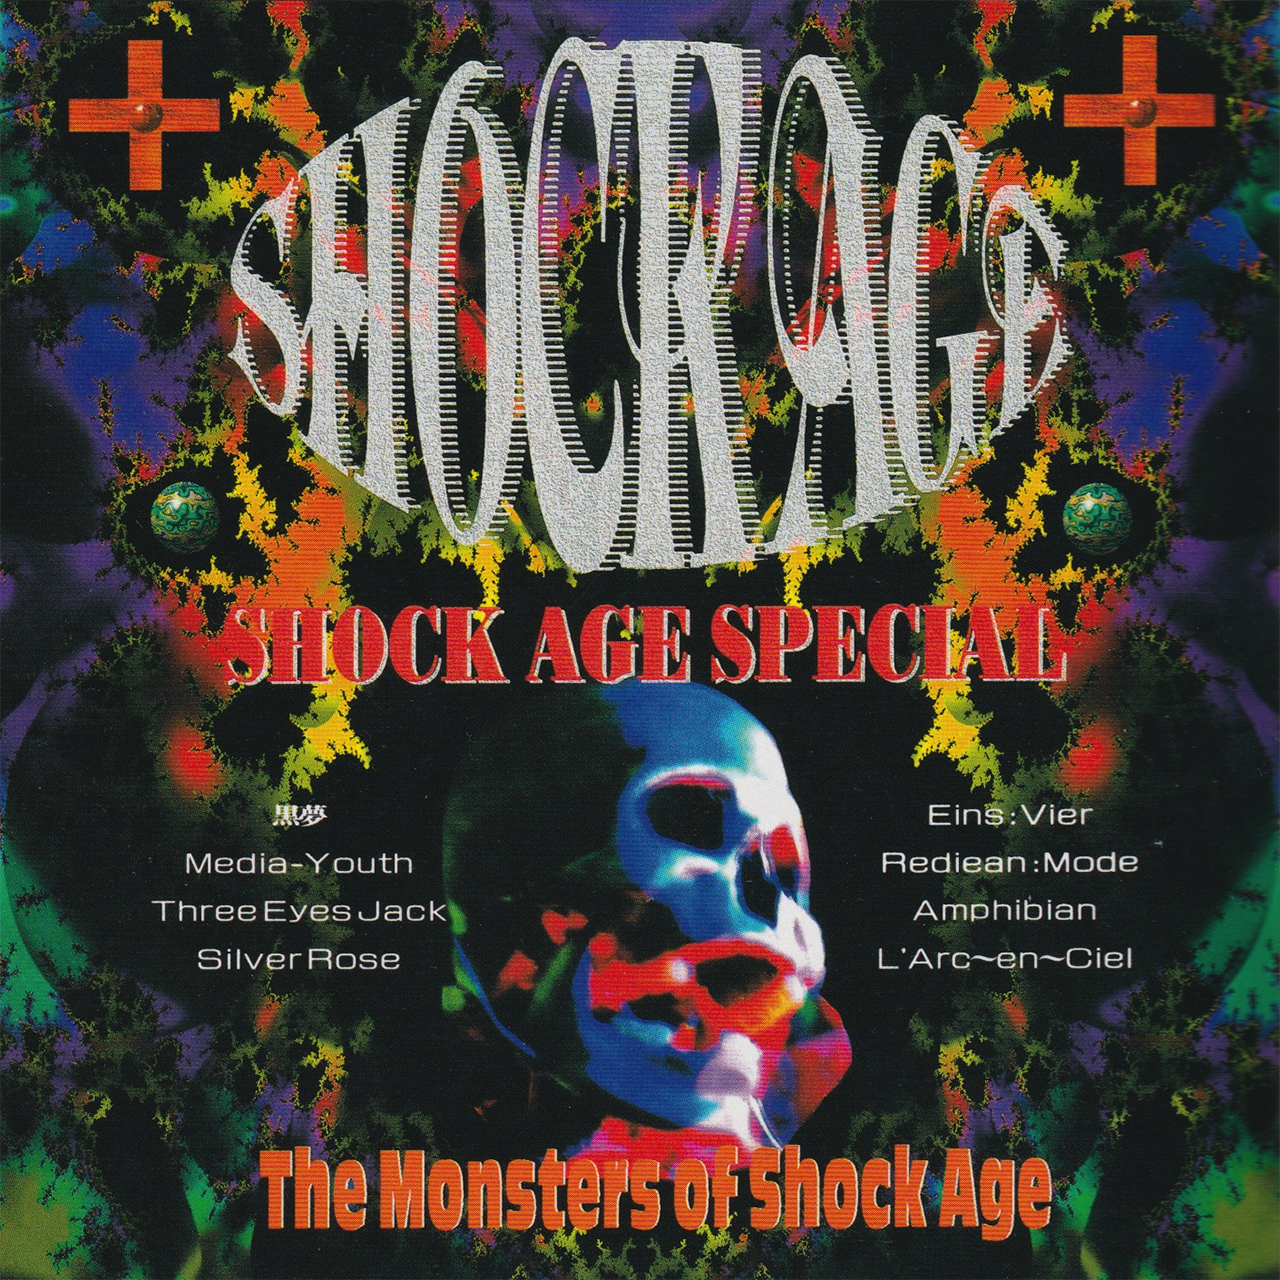 Shock Age Special: The Monsters Of Shock Age / V.A.